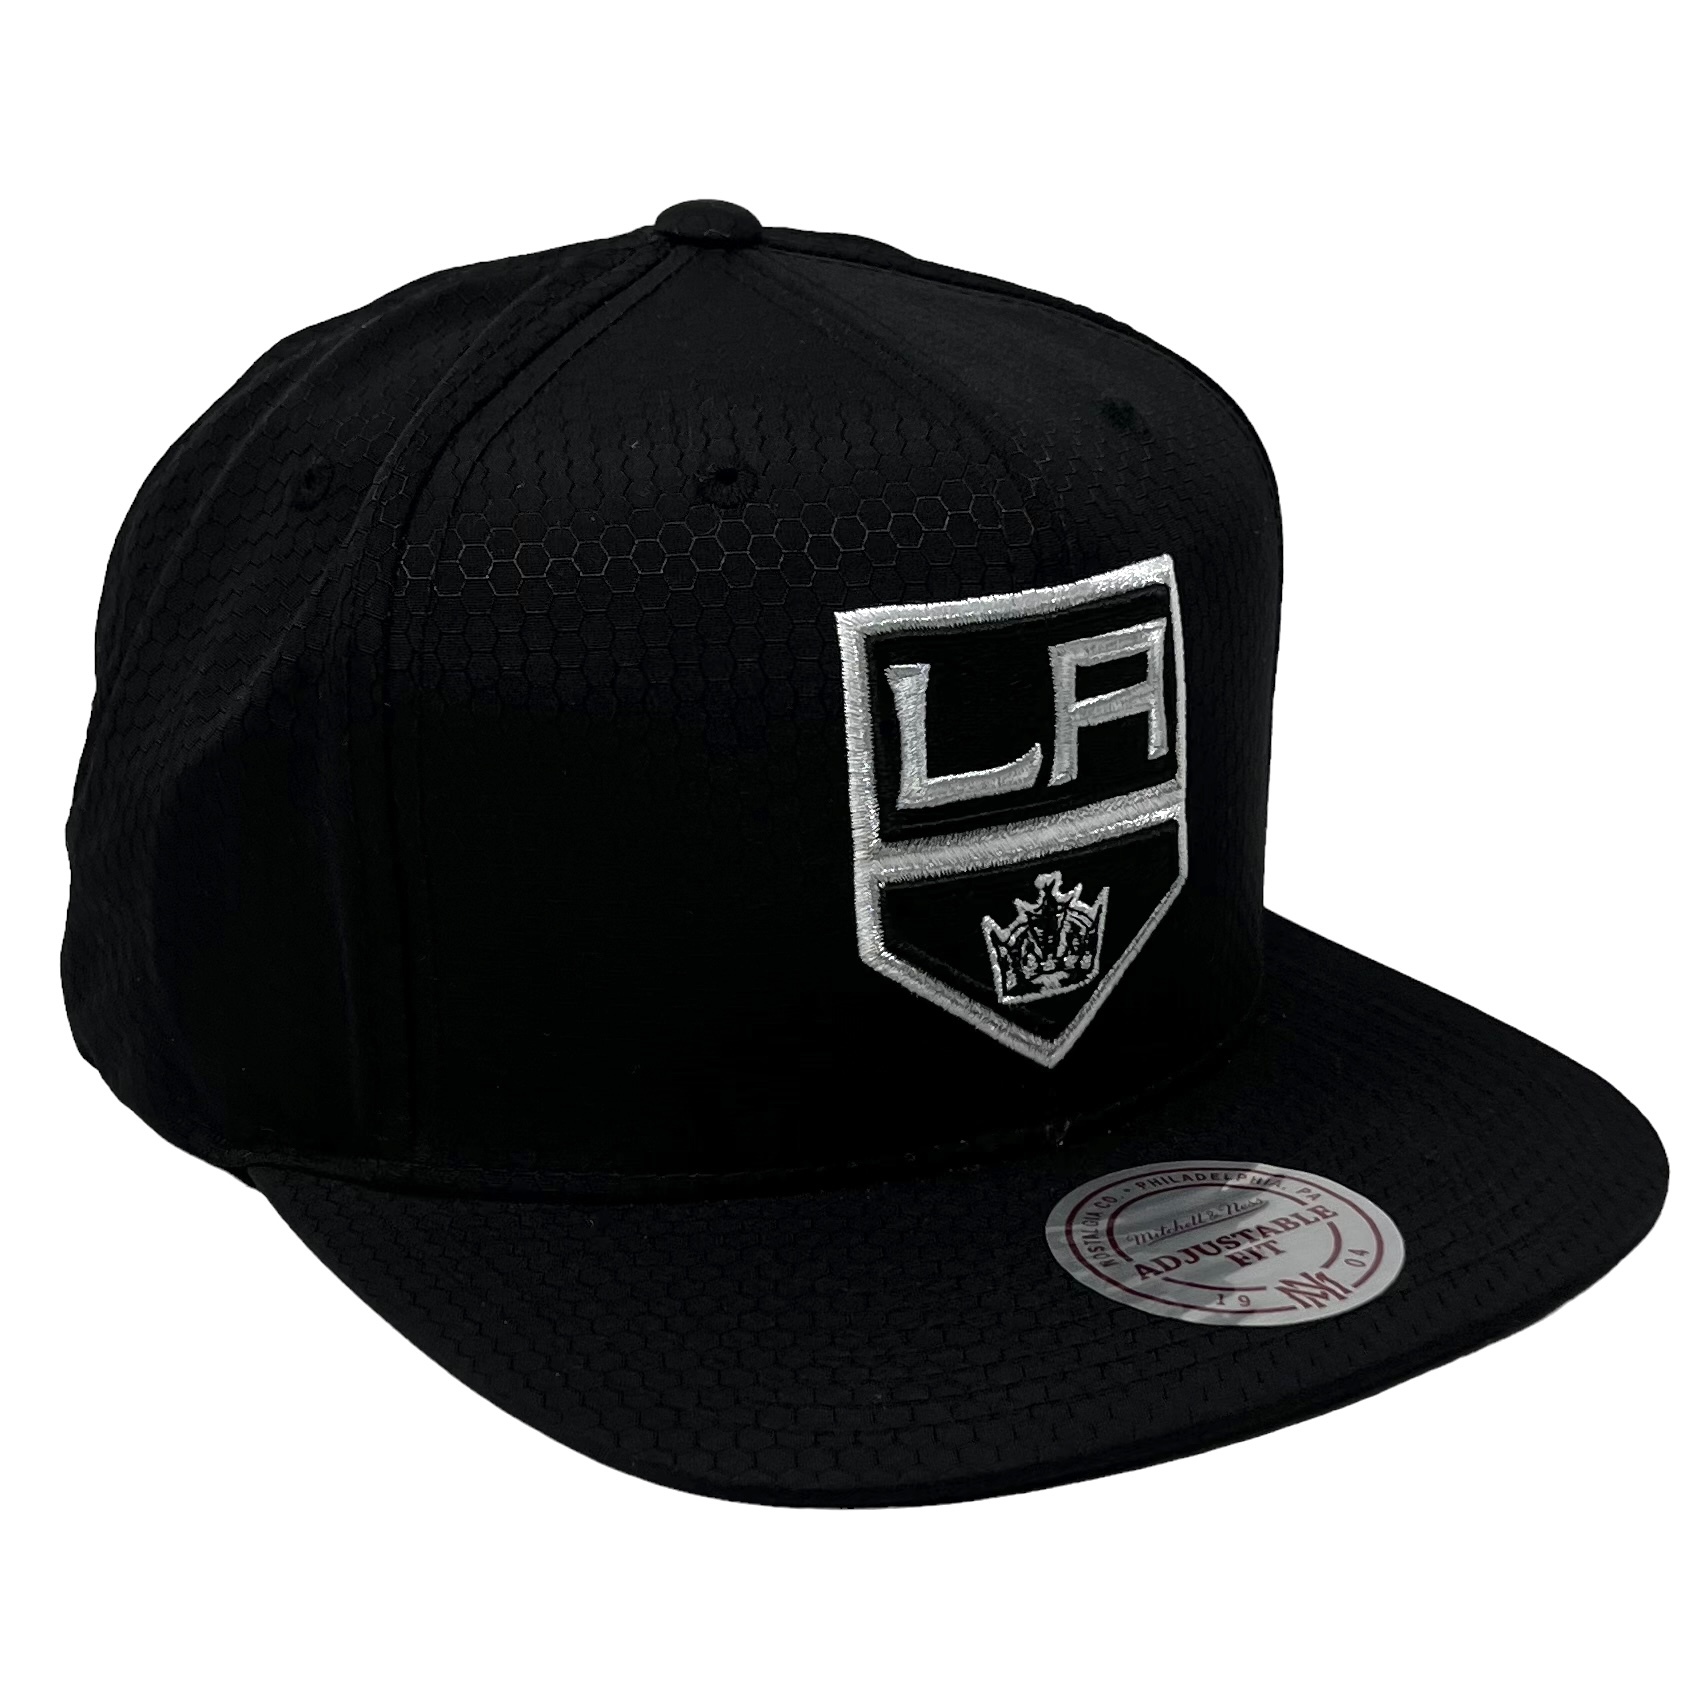 Mitchell and Ness LA Kings Mitchell & Ness Homage Crown